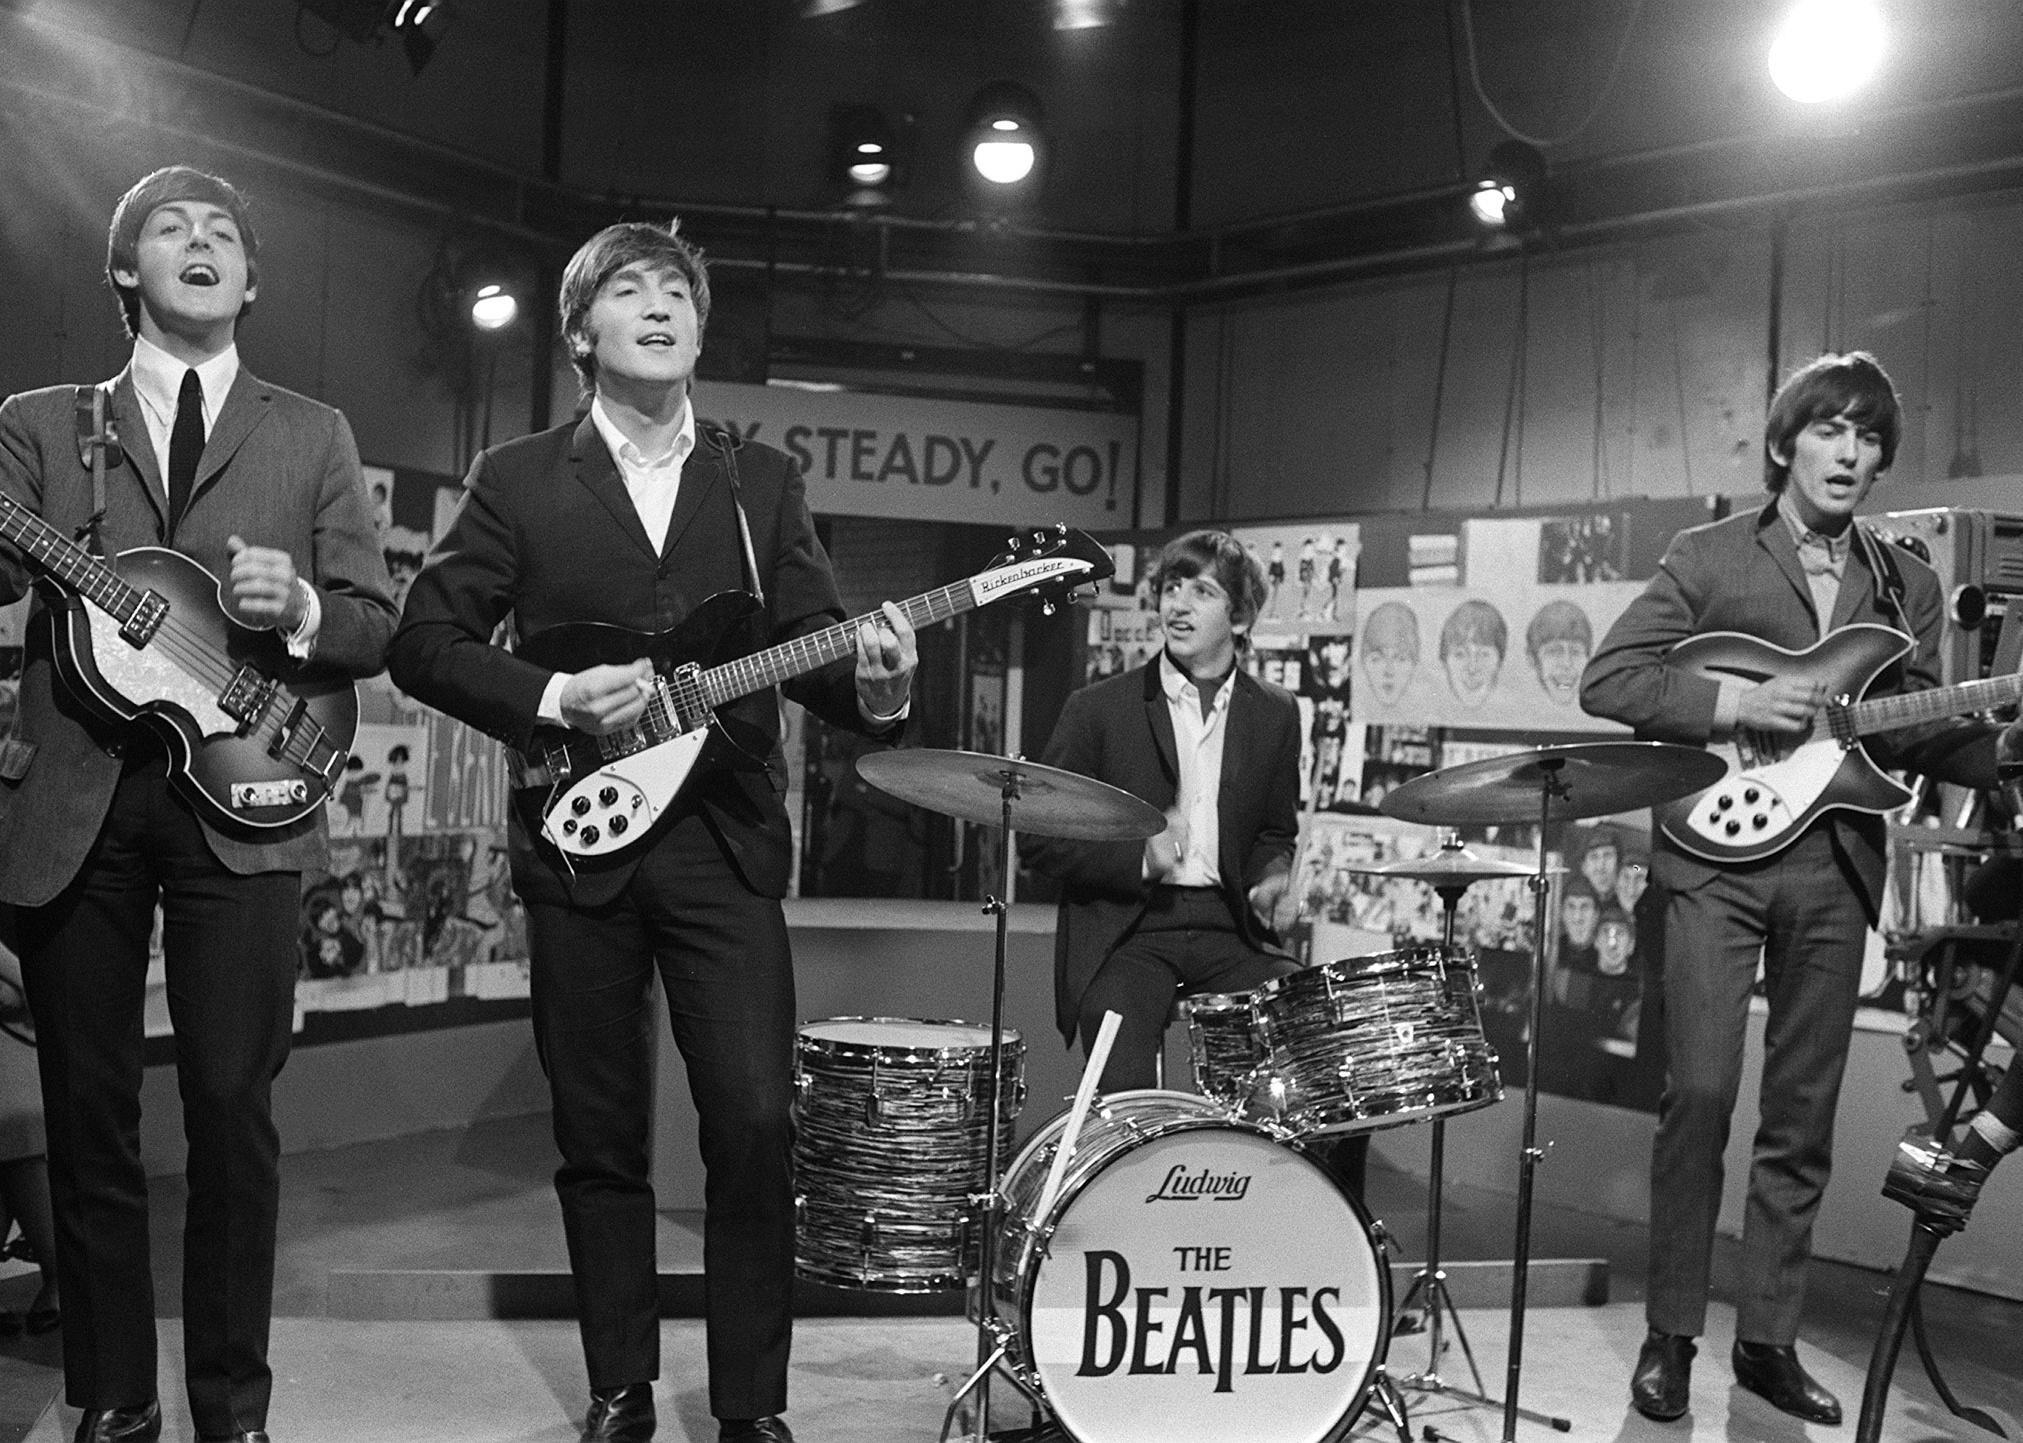 The Beatles performing in a studio.